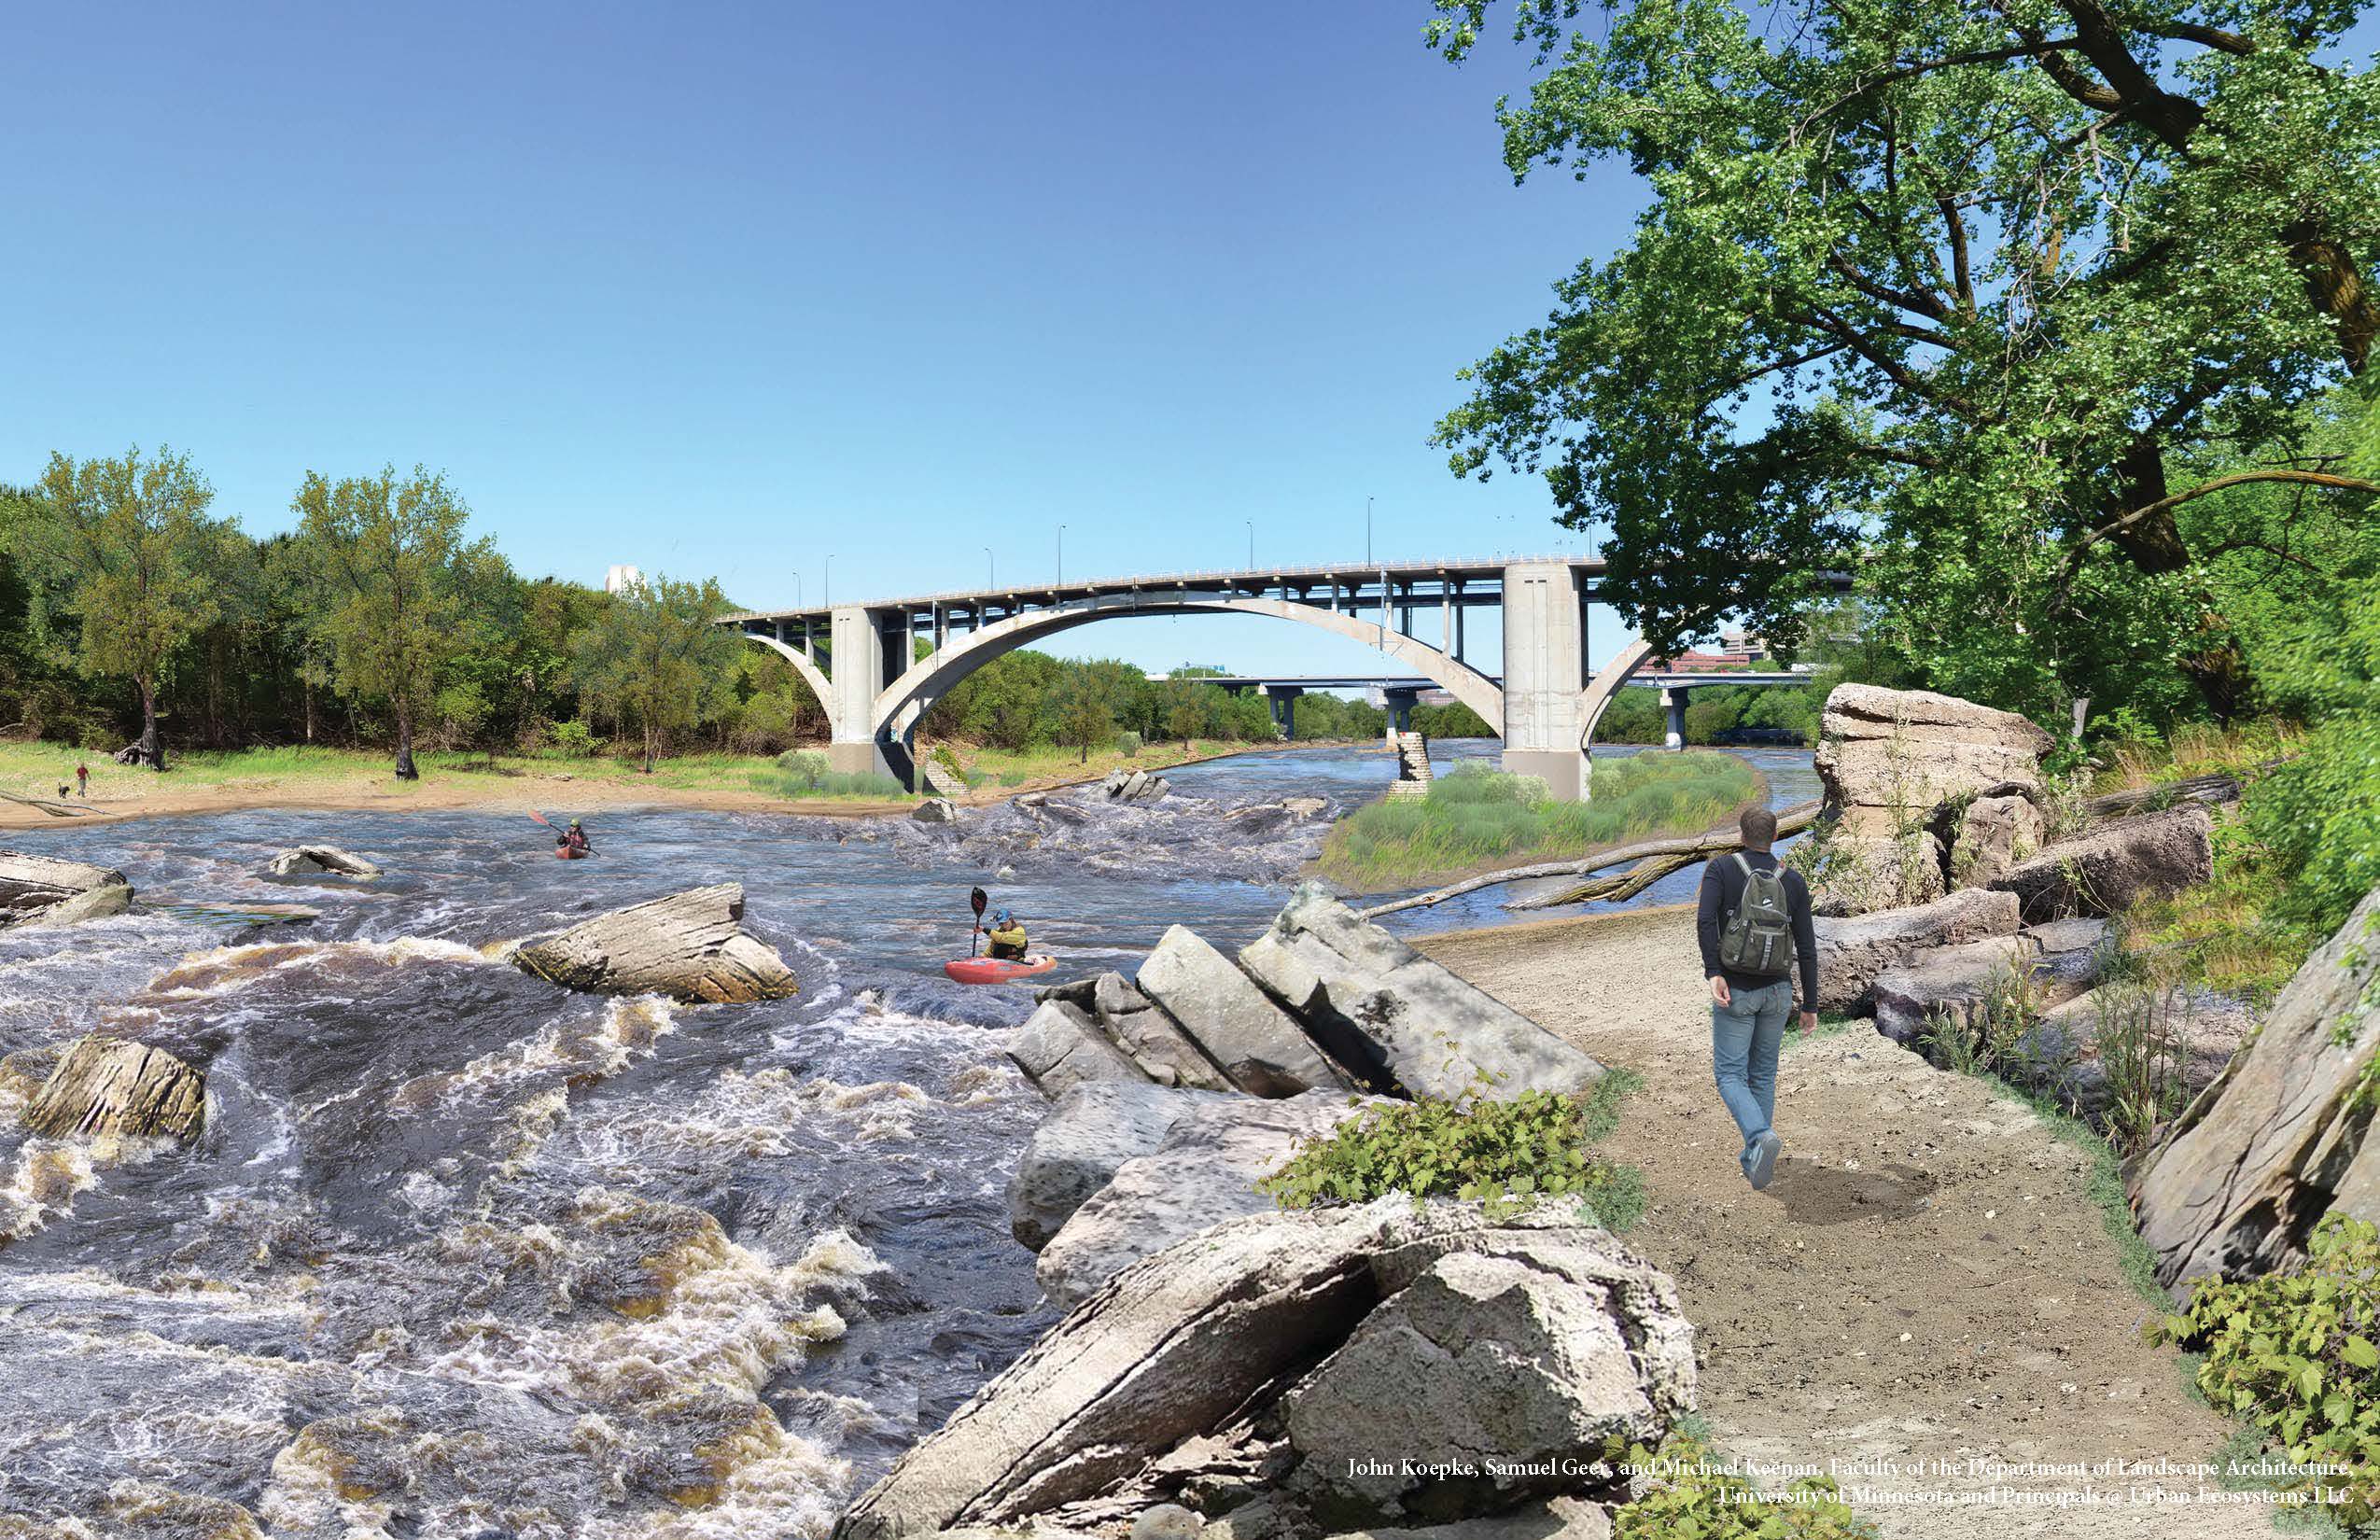 Artist renderings of the Mississippi River Gorge without the dams. Credit: John Koepke, Samuel Geer, and Michael Keenan, Faculty of the Department of Landscape Architecture, University of Minnesota and Principals @ Urban Ecosystems LLC